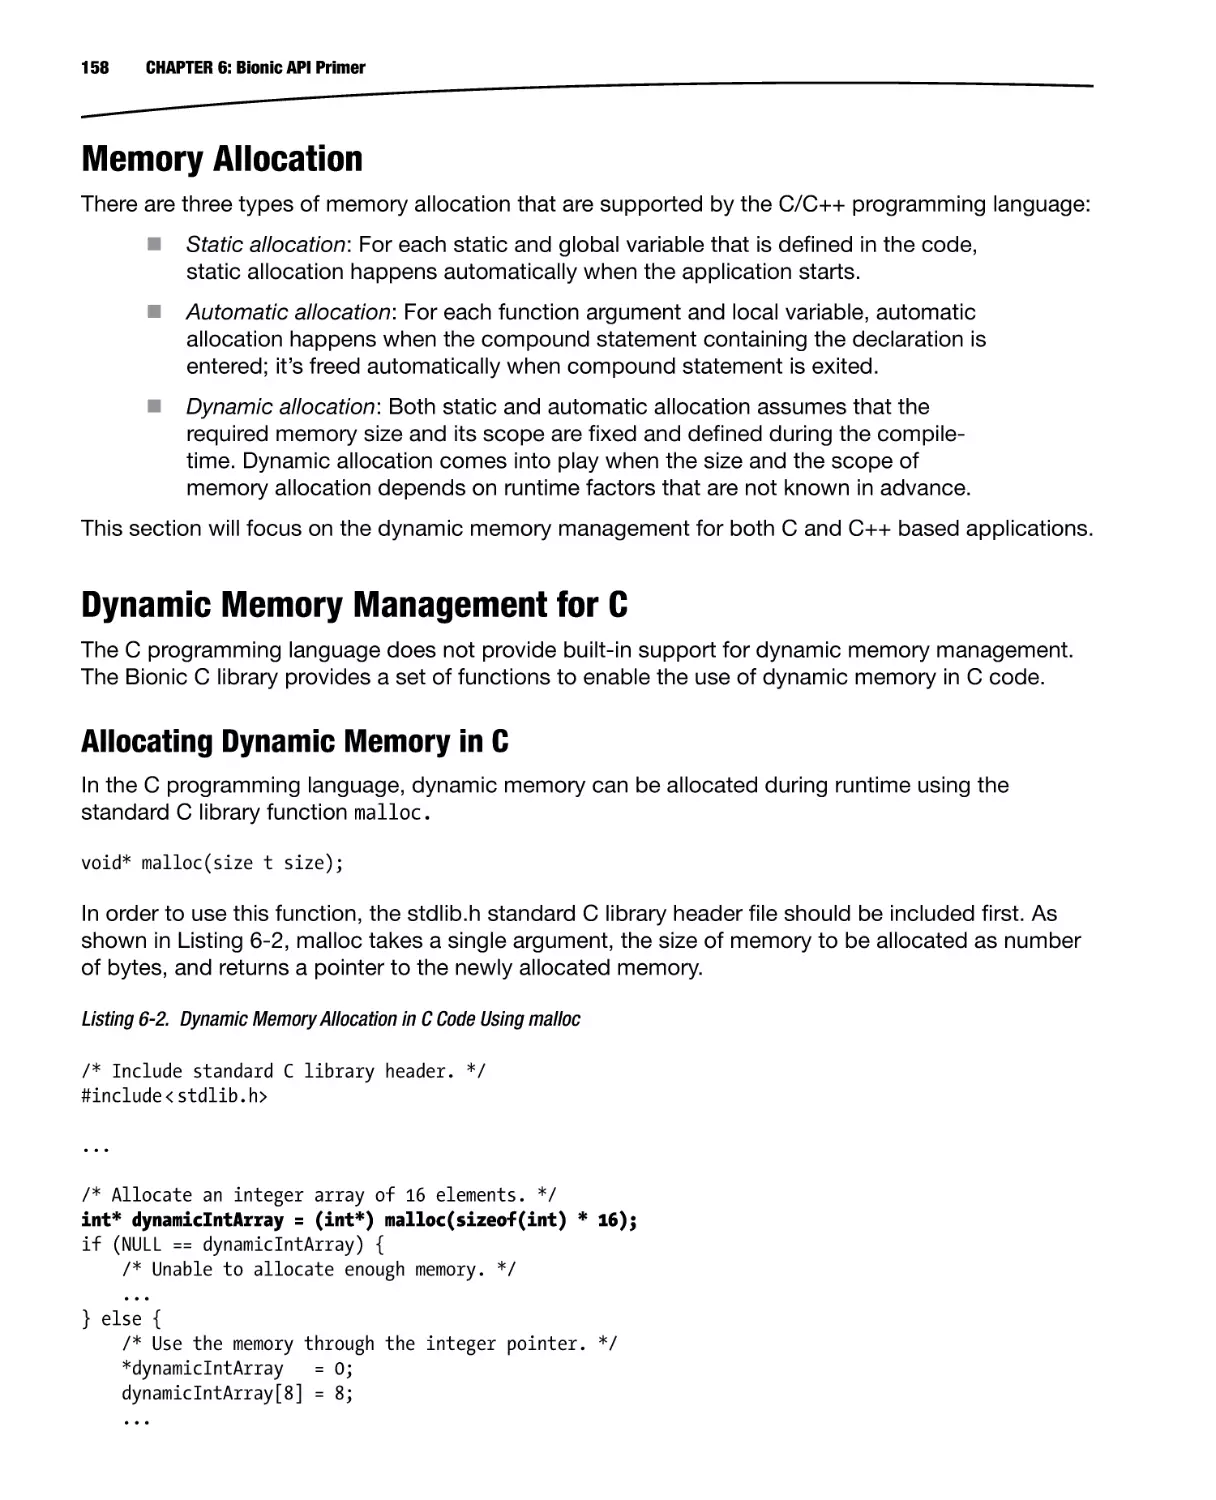 Memory Allocation
Dynamic Memory Management for C
Allocating Dynamic Memory in C